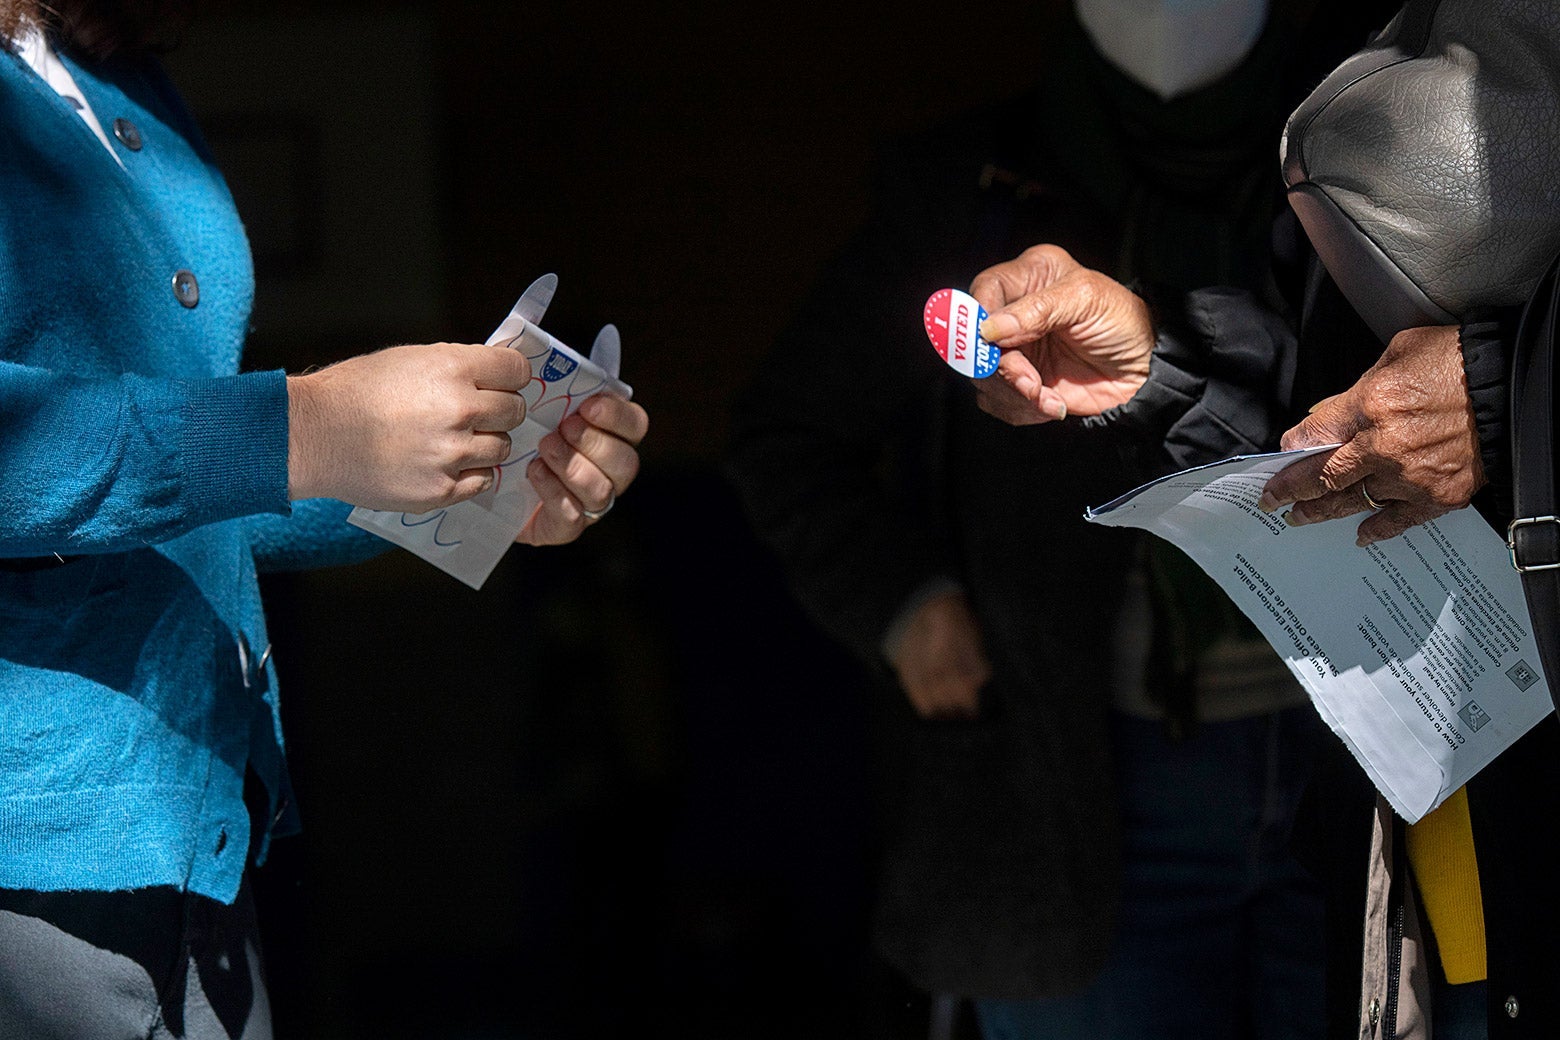 A voter gets an "I Voted" sticker after casting a ballot